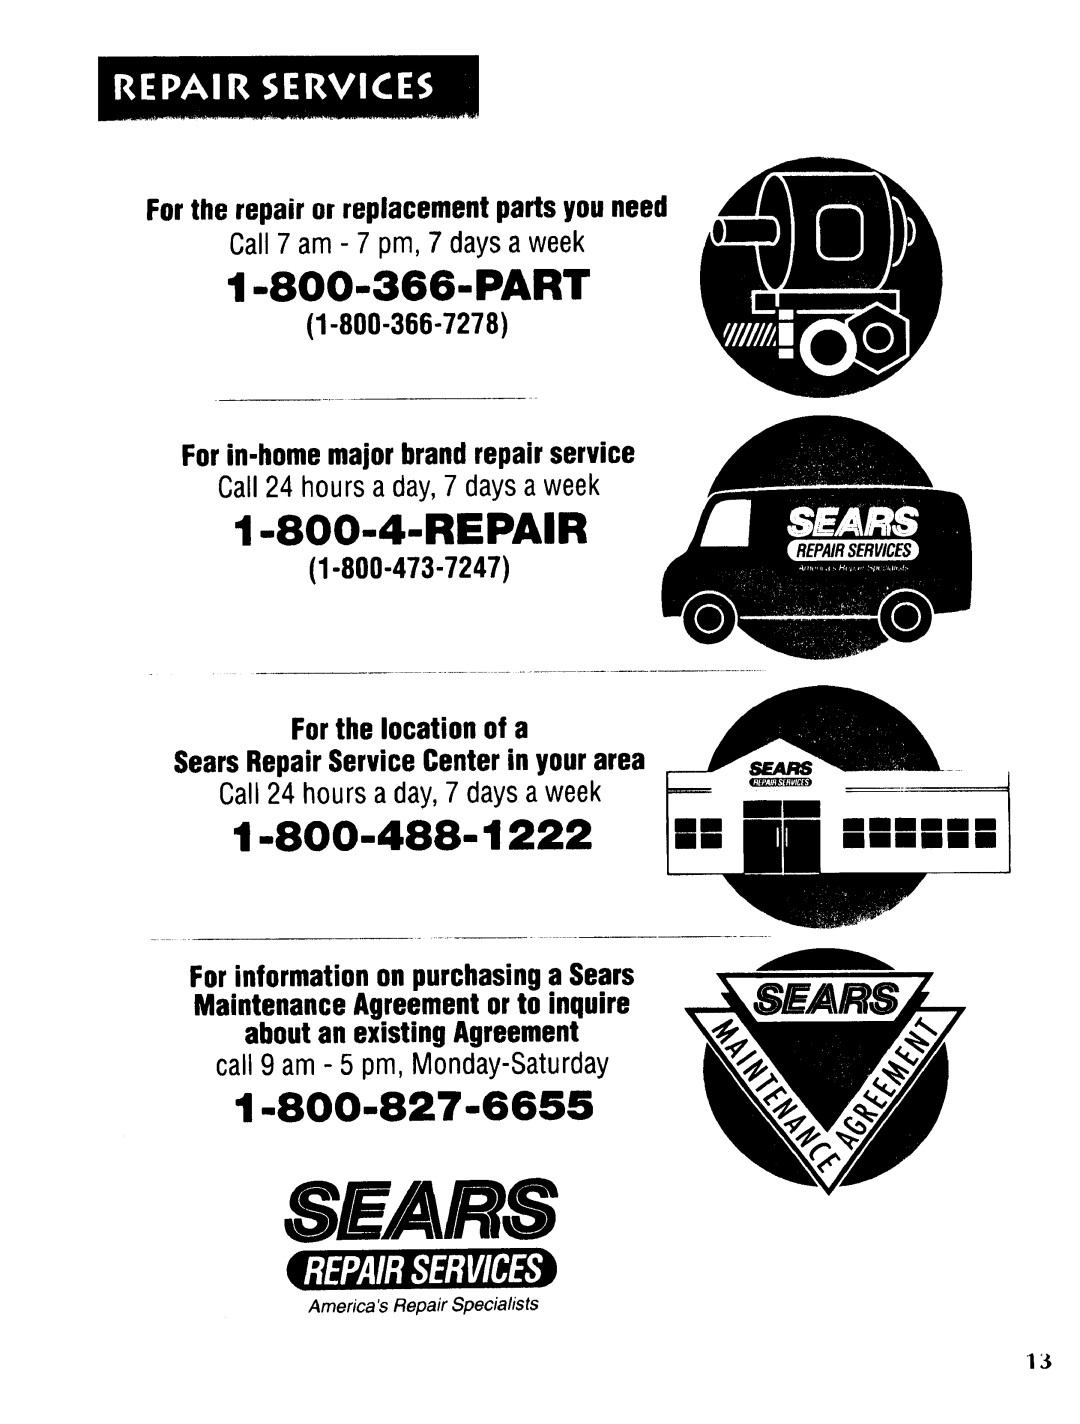 Sears 274.4345869A Part, Forthe locationof a, SearsRepairServiceCenterin yourarea, Call24 hours a day,7 daysa week 